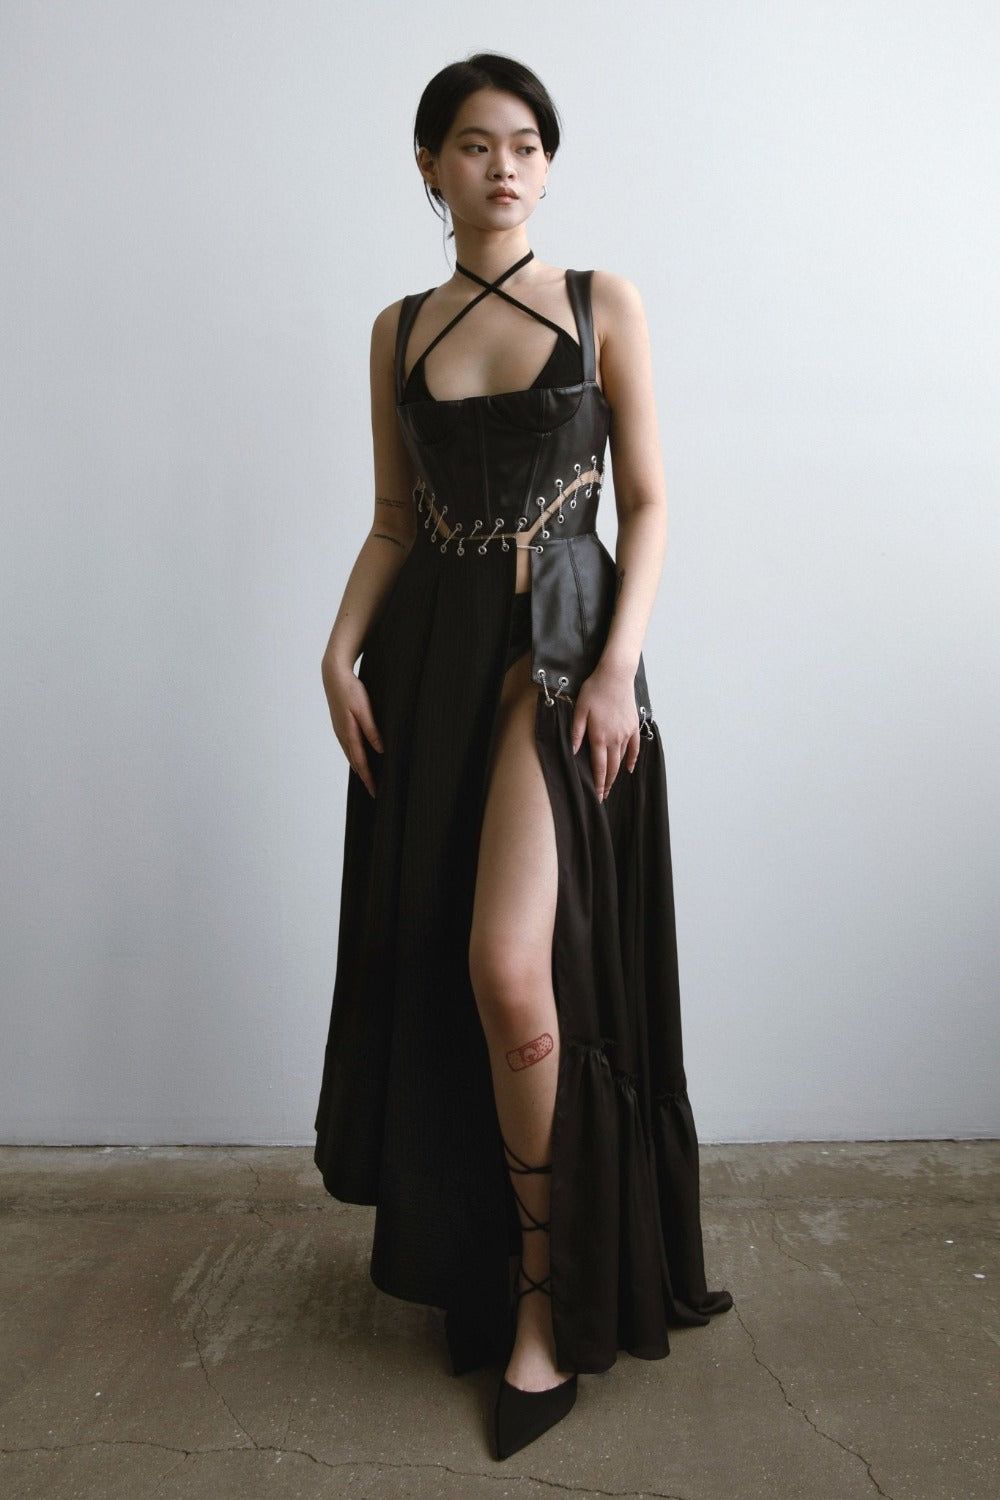 DECONSTRUCTED DRESS (MADE-TO-ORDER) - MARINA EEЯRIE